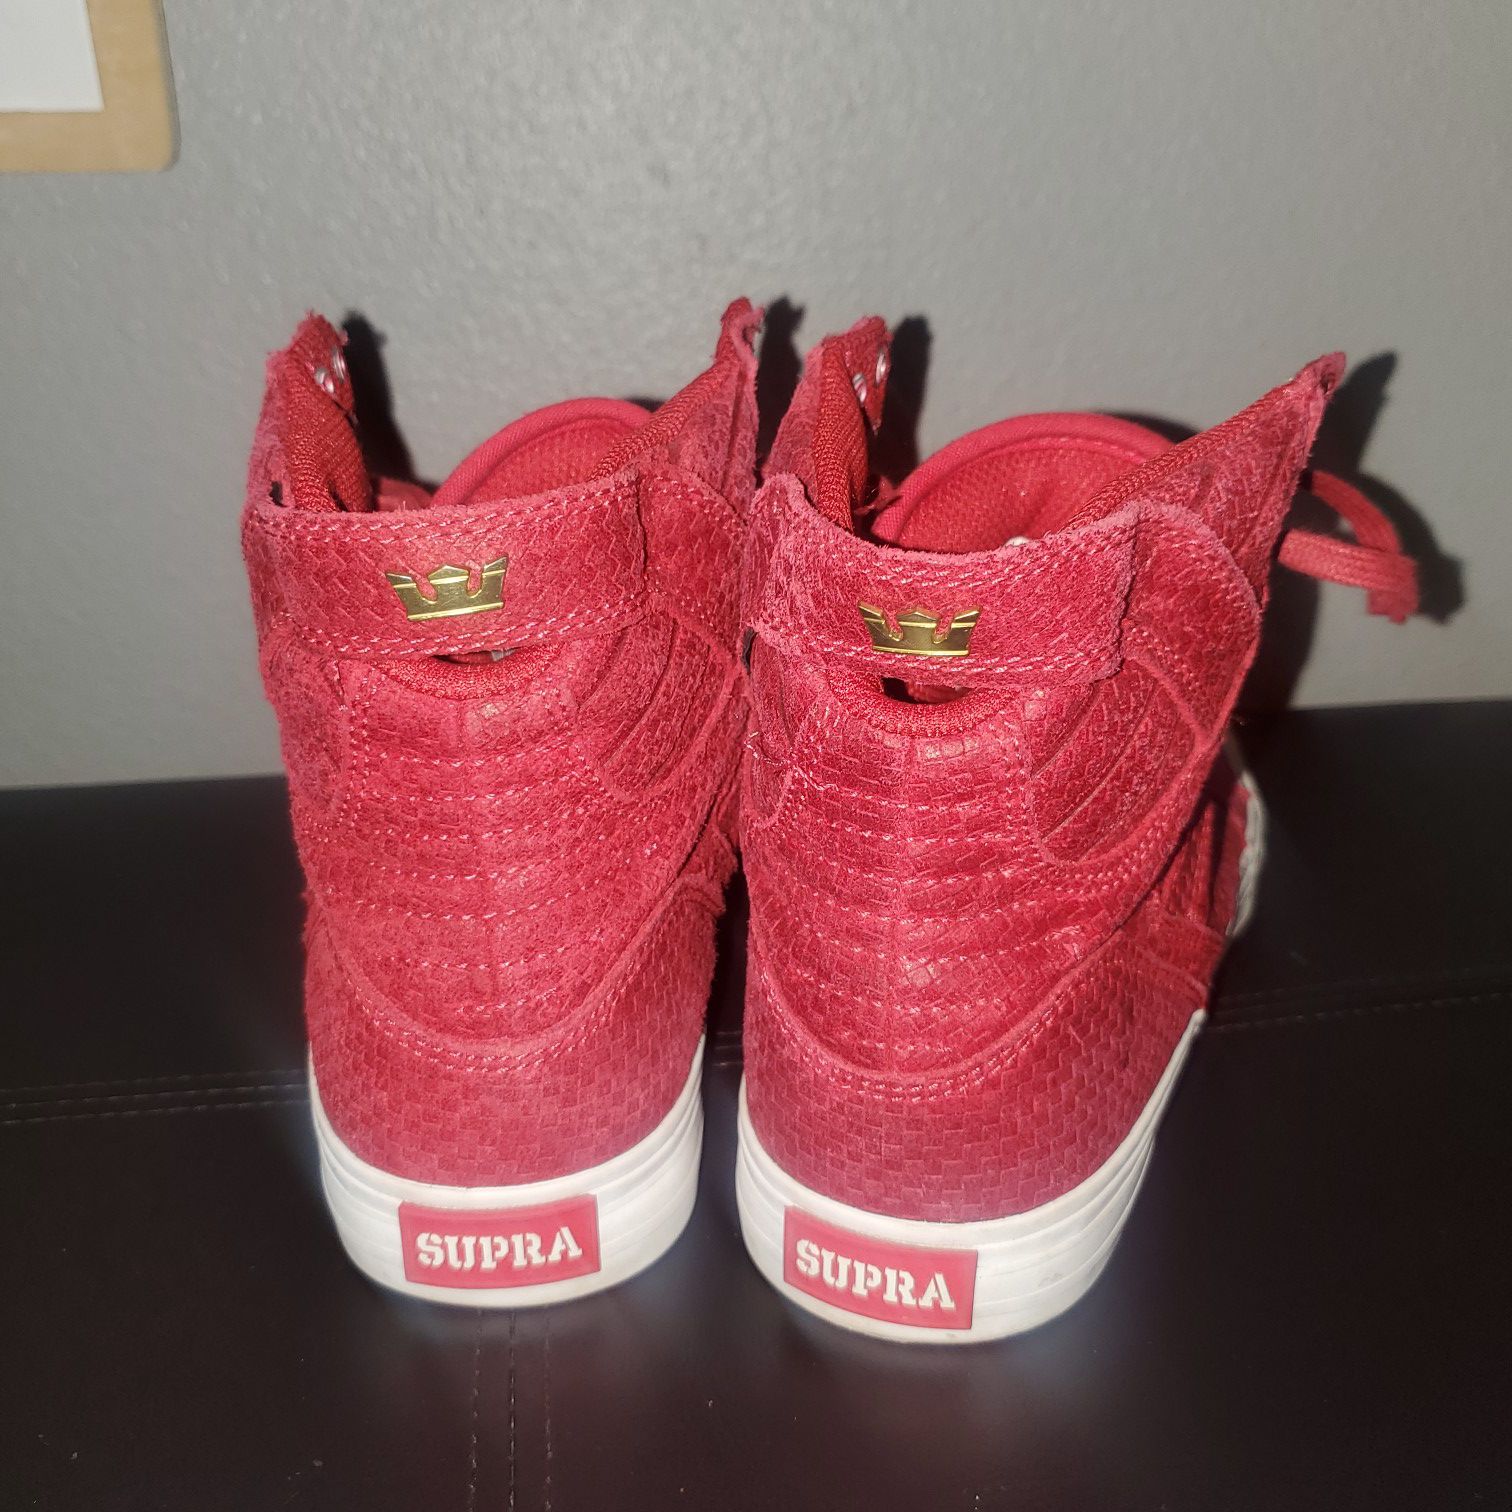 Sold at Auction: US Supra Sneakers, Muska 001 Red High Tops, Size